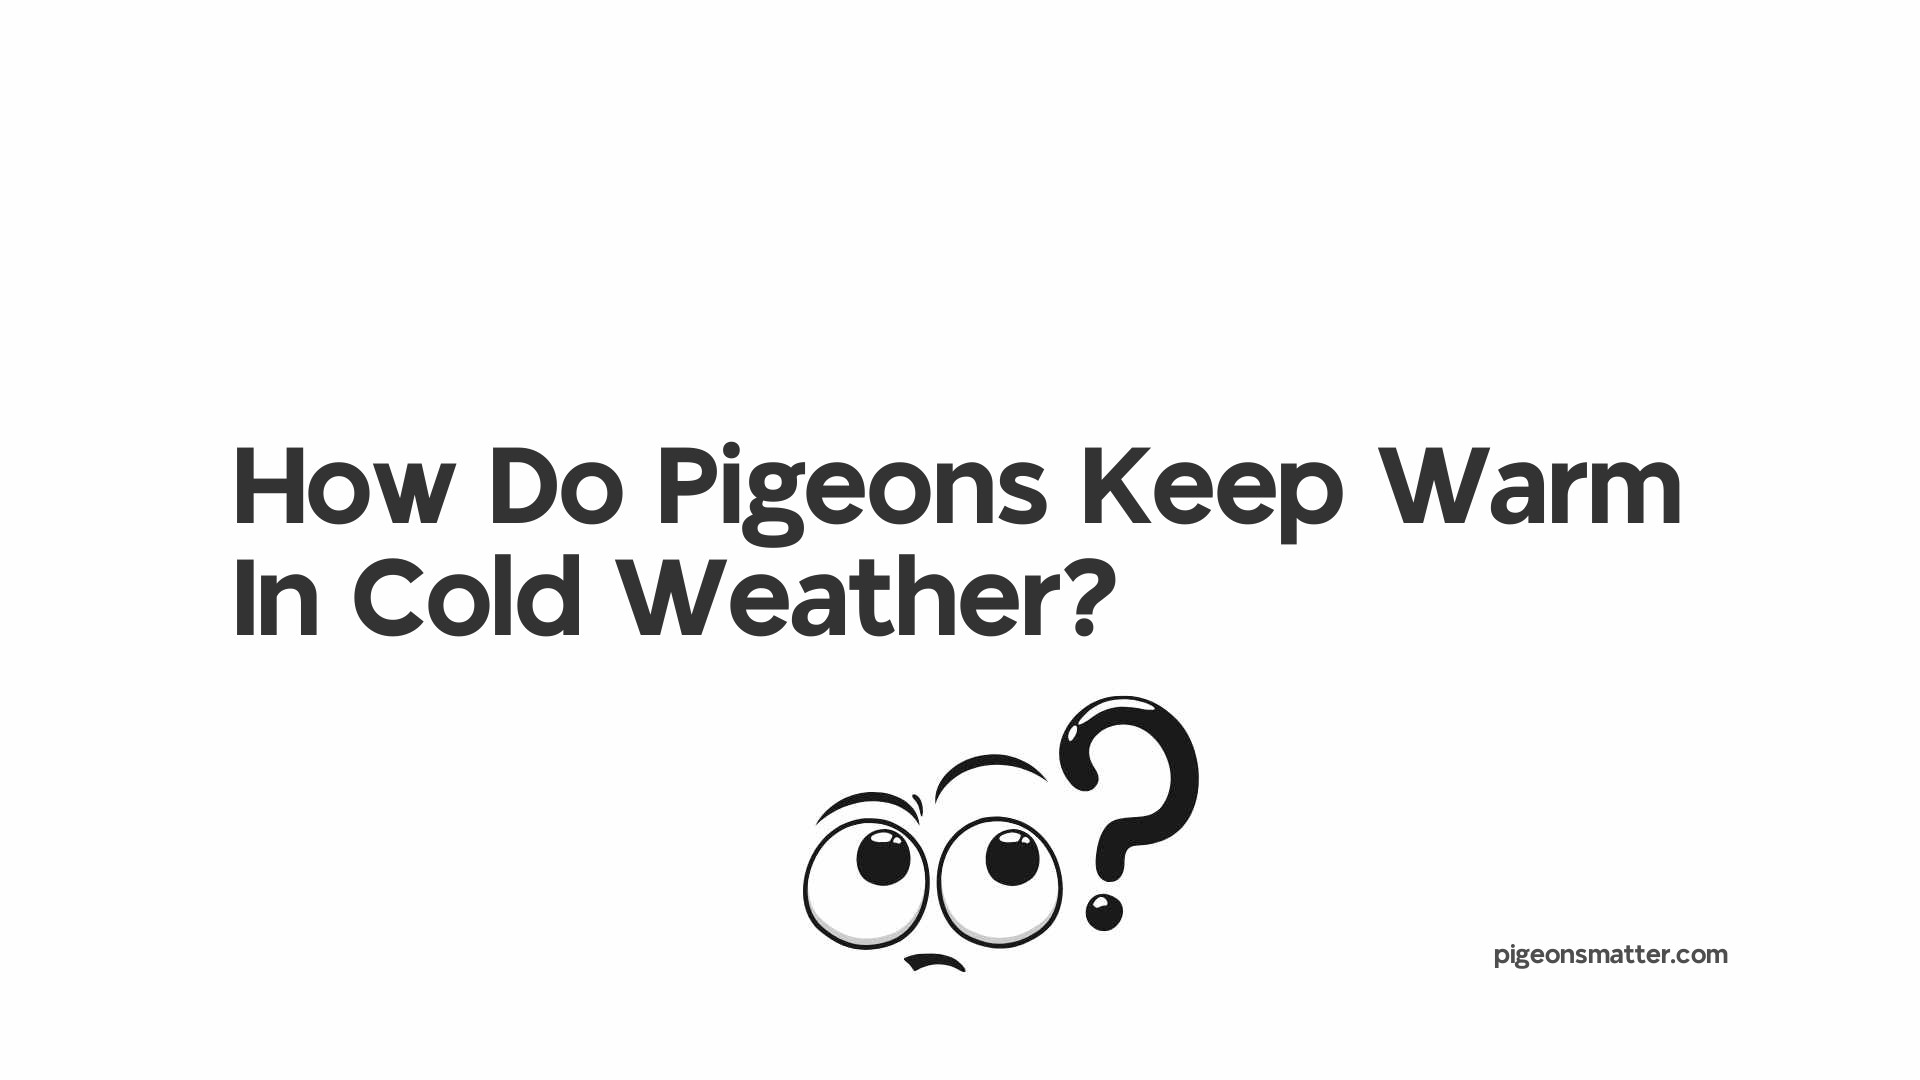 How Do Pigeons Keep Warm In Cold Weather?